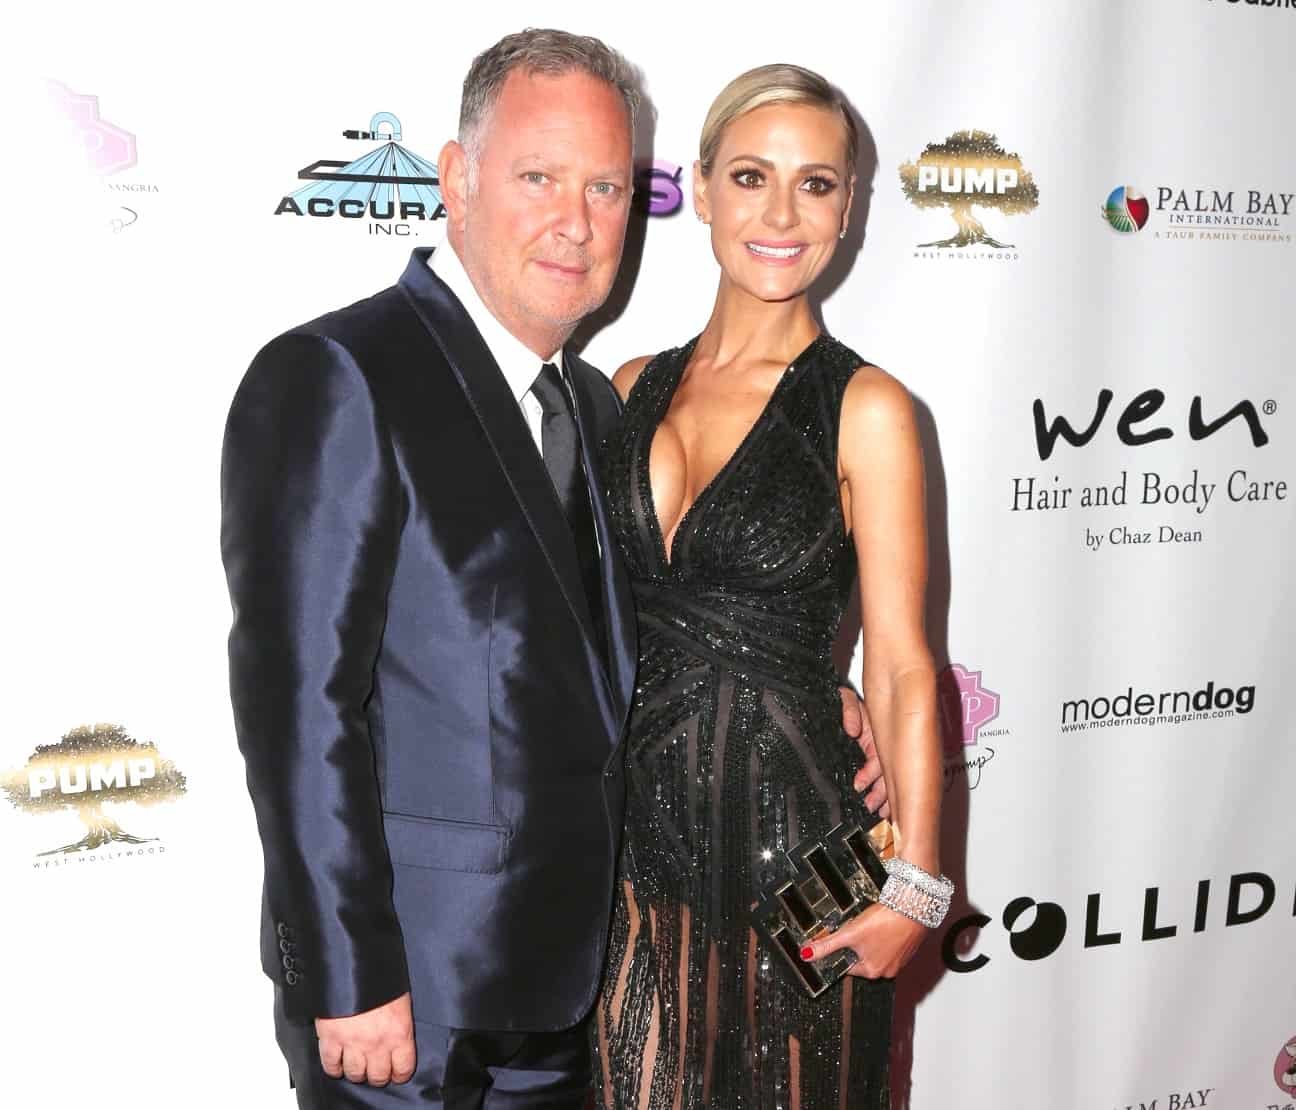 RHOBH Star Paul "PK" Kemsley Addresses Dorit's Absence From Social Media, Responds to Someone Accusing Him of Setting Up Armed Robbery